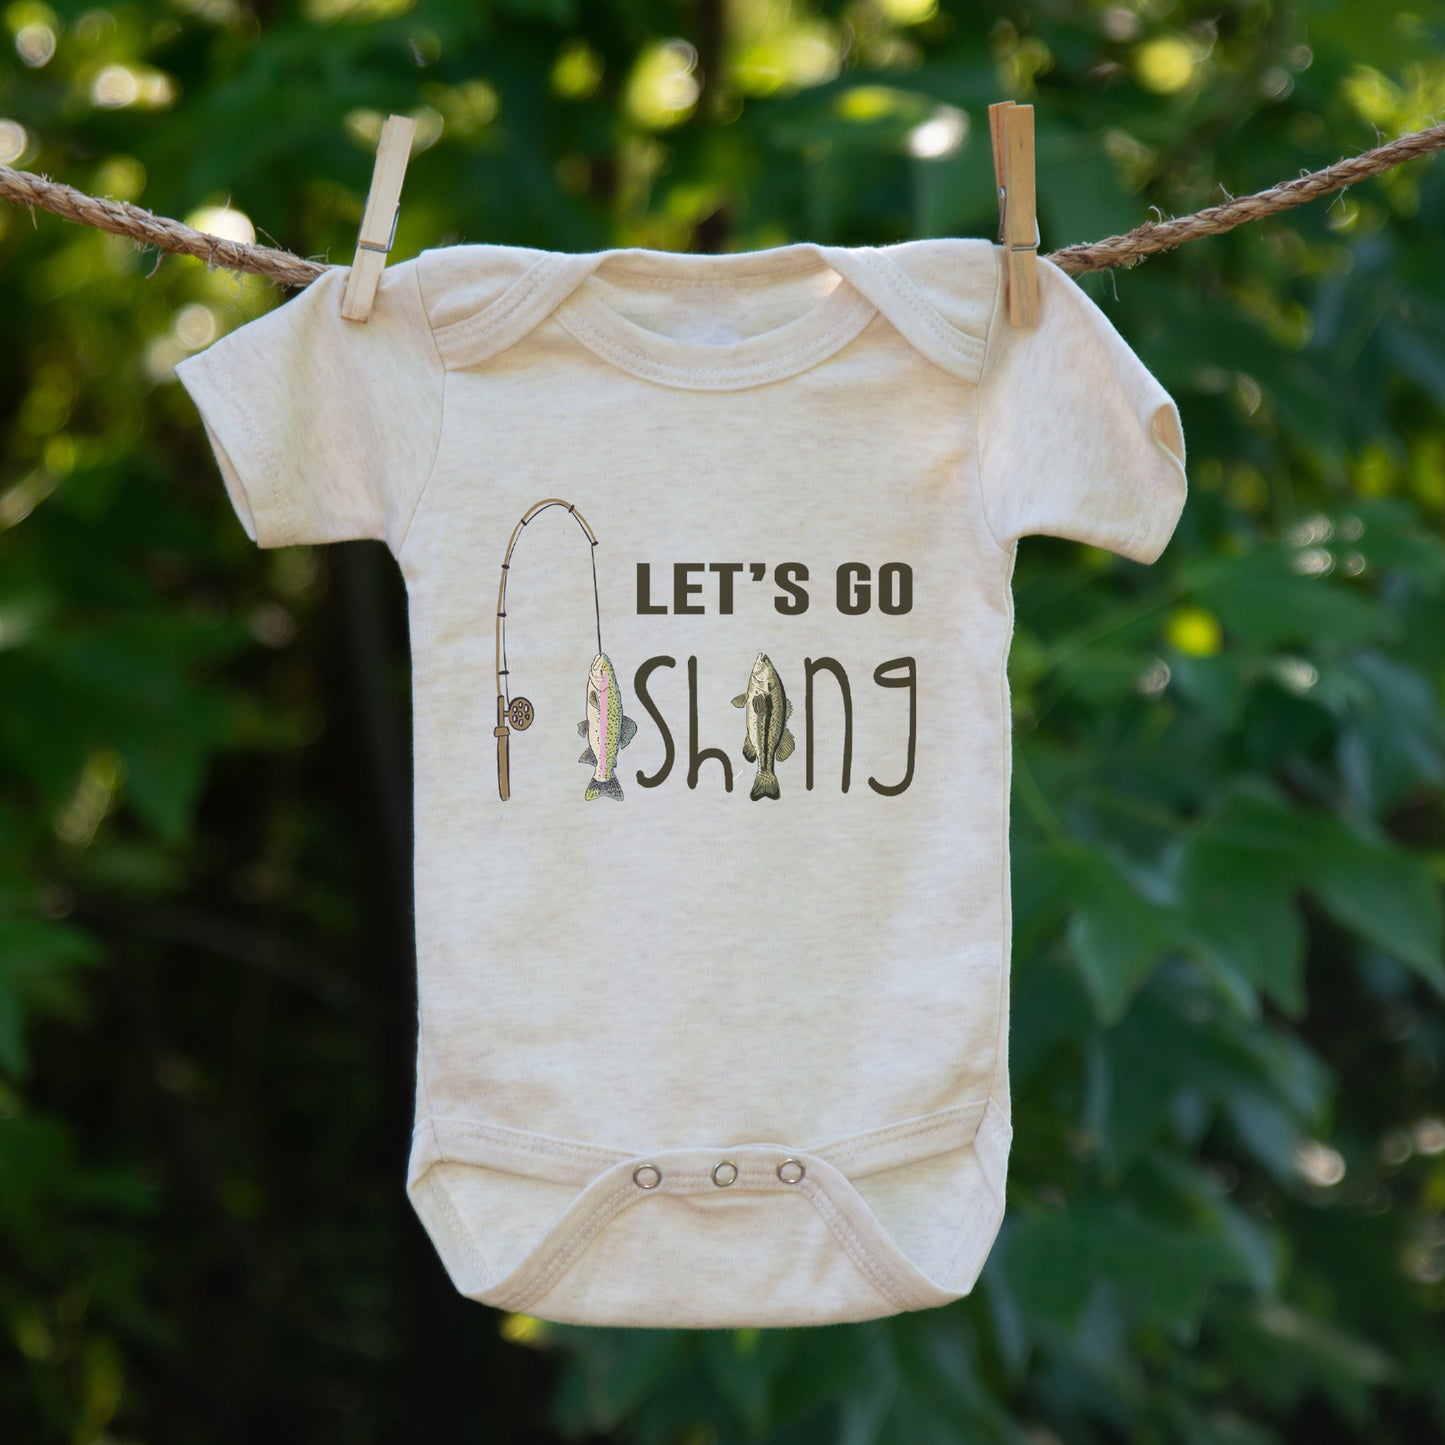 "Let's go fishing" Summer Body Suit